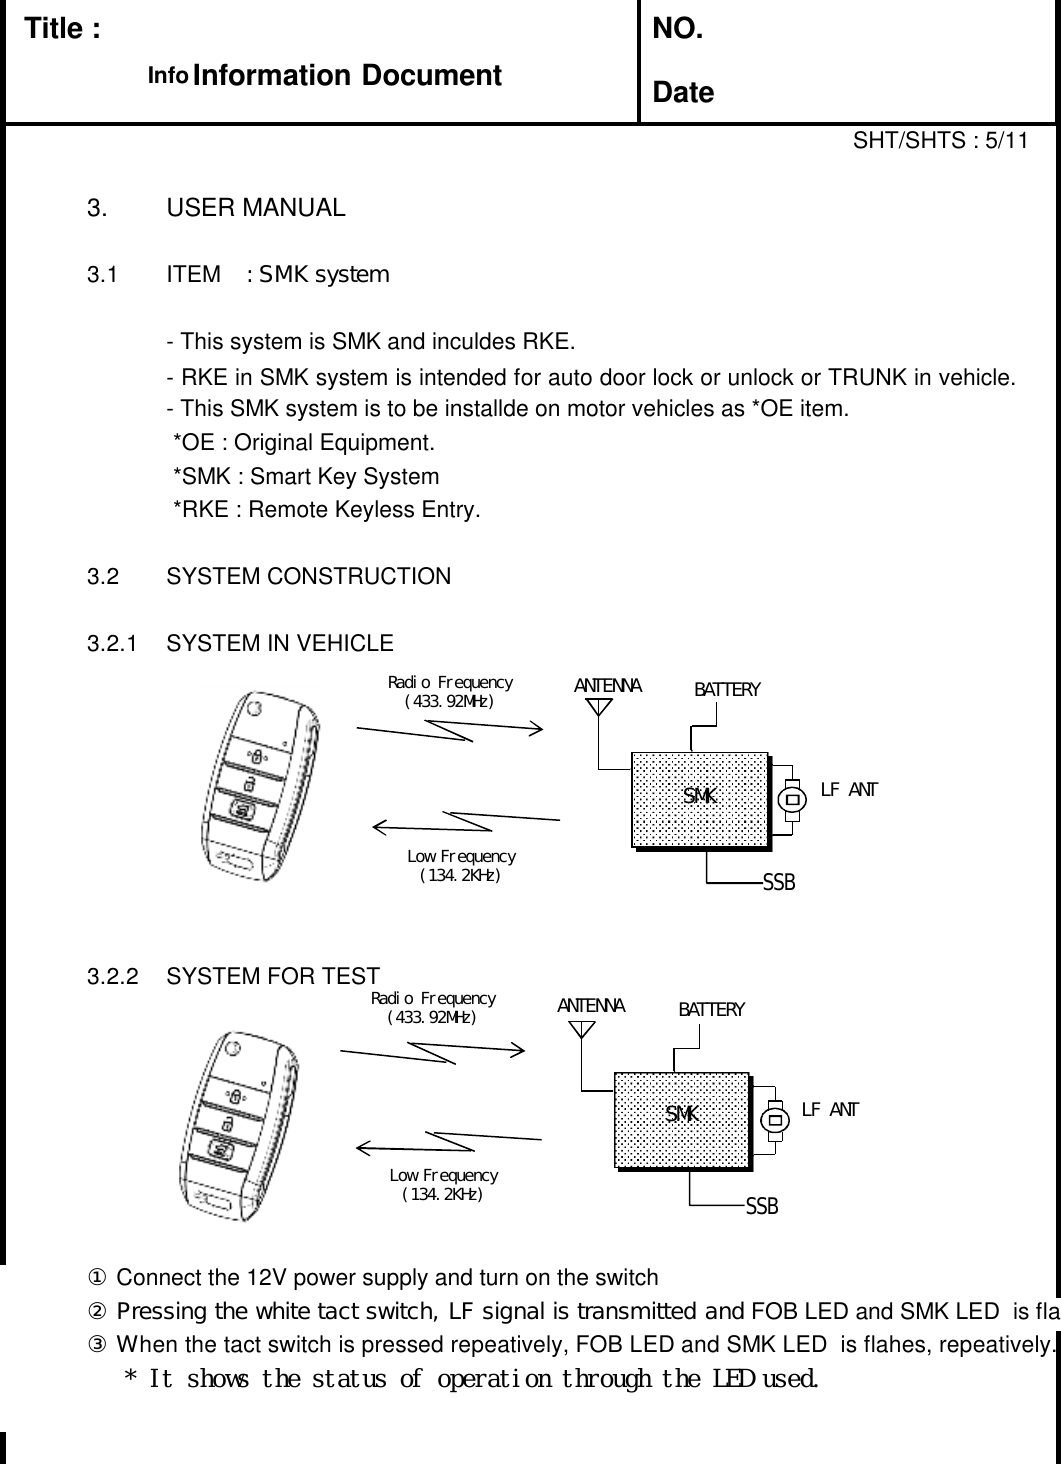 hesrmation DocumentInformation DocumentInformation DocumentTitle :Info Information DocumentNO.DateSHT/SHTS : 5/113. USER MANUAL3.1 ITEM  : SMK system- This system is SMK and inculdes RKE.- RKE in SMK system is intended for auto door lock or unlock or TRUNK in vehicle. - This SMK system is to be installde on motor vehicles as *OE item.*OE : Original Equipment.*SMK : Smart Key System*RKE : Remote Keyless Entry.3.2 SYSTEM CONSTRUCTION3.2.1 SYSTEM IN VEHICLERadio Frequency(433.92MHz)Low Frequency(134.2KHz)ANTENNA  BATTERYSMK  LF ANTSSB3.2.2 SYSTEM FOR TESTRadio Frequency(433.92MHz)Low Frequency(134.2KHz)ANTENNA  BATTERYSMK  LF ANTSSB①Connect the 12V power supply and turn on the switch② Pressing the white tact switch, LF signal is transmitted and FOB LED and SMK LED  is fla③When the tact switch is pressed repeatively, FOB LED and SMK LED  is flahes, repeatively. * It shows the status of operation through the LED used.